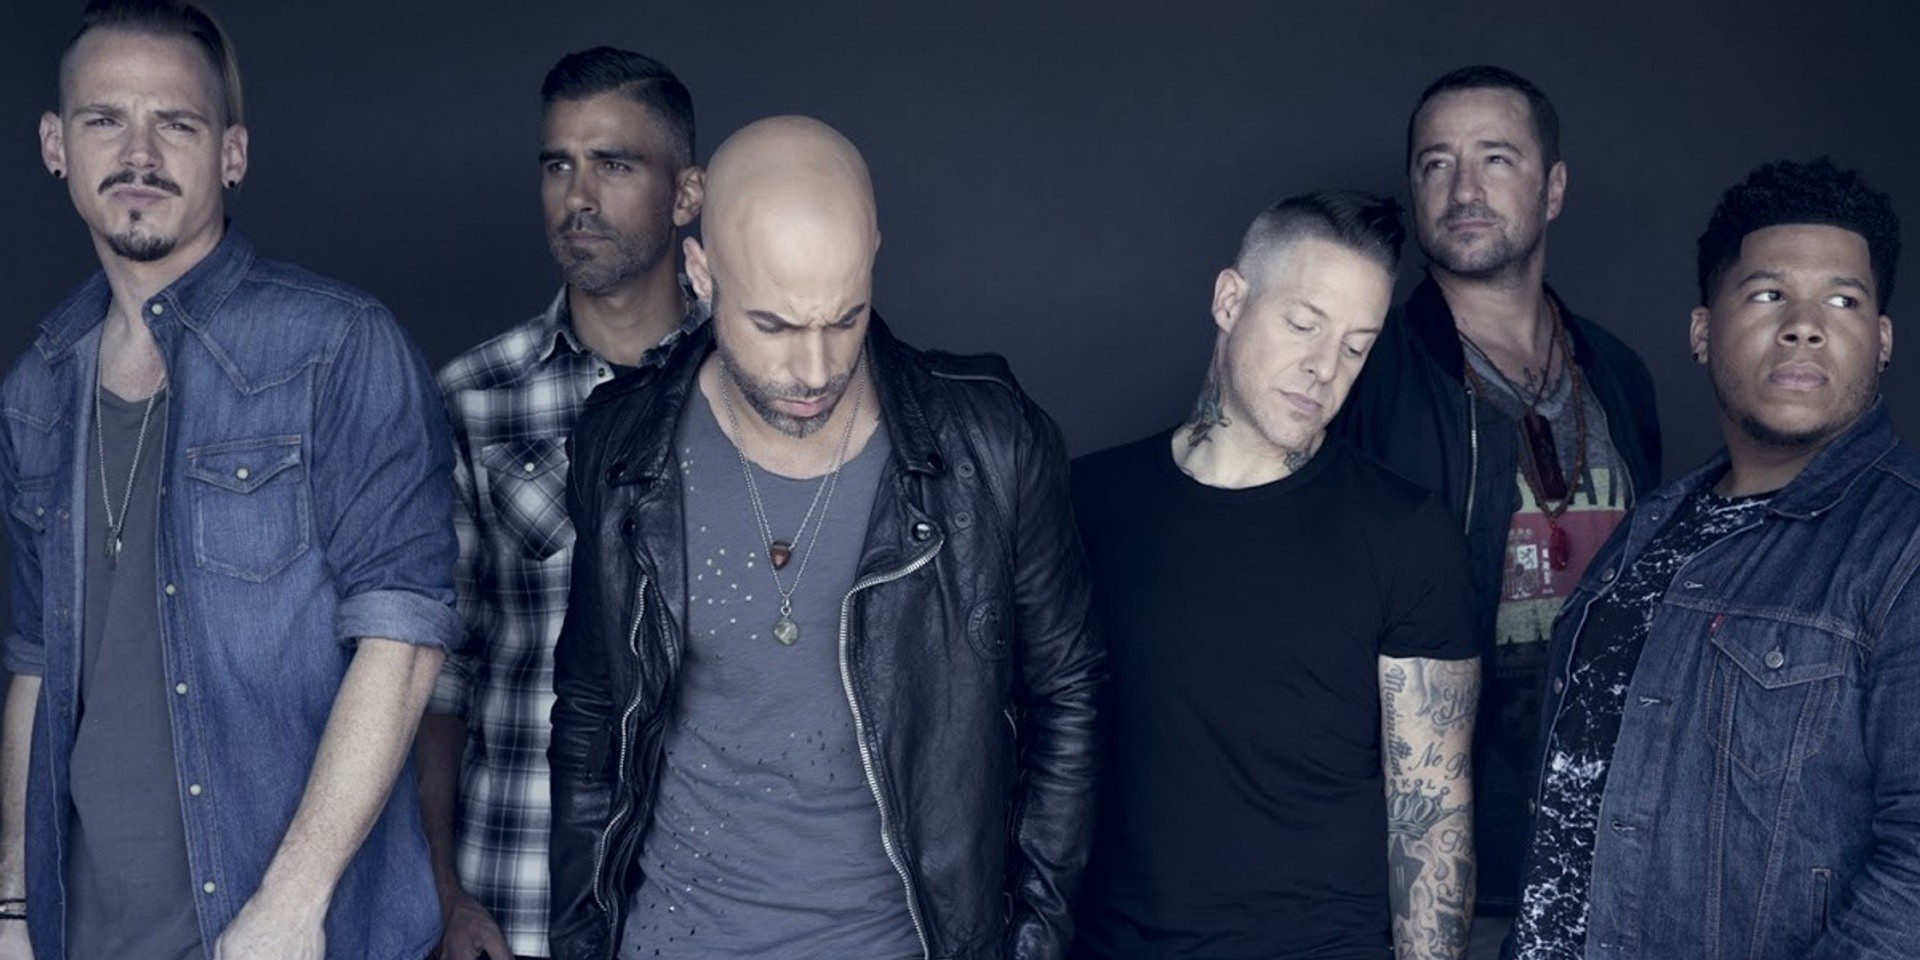 "I like this guy a lot more": Chris Daughtry on the band's new album and how he's grown since American Idol